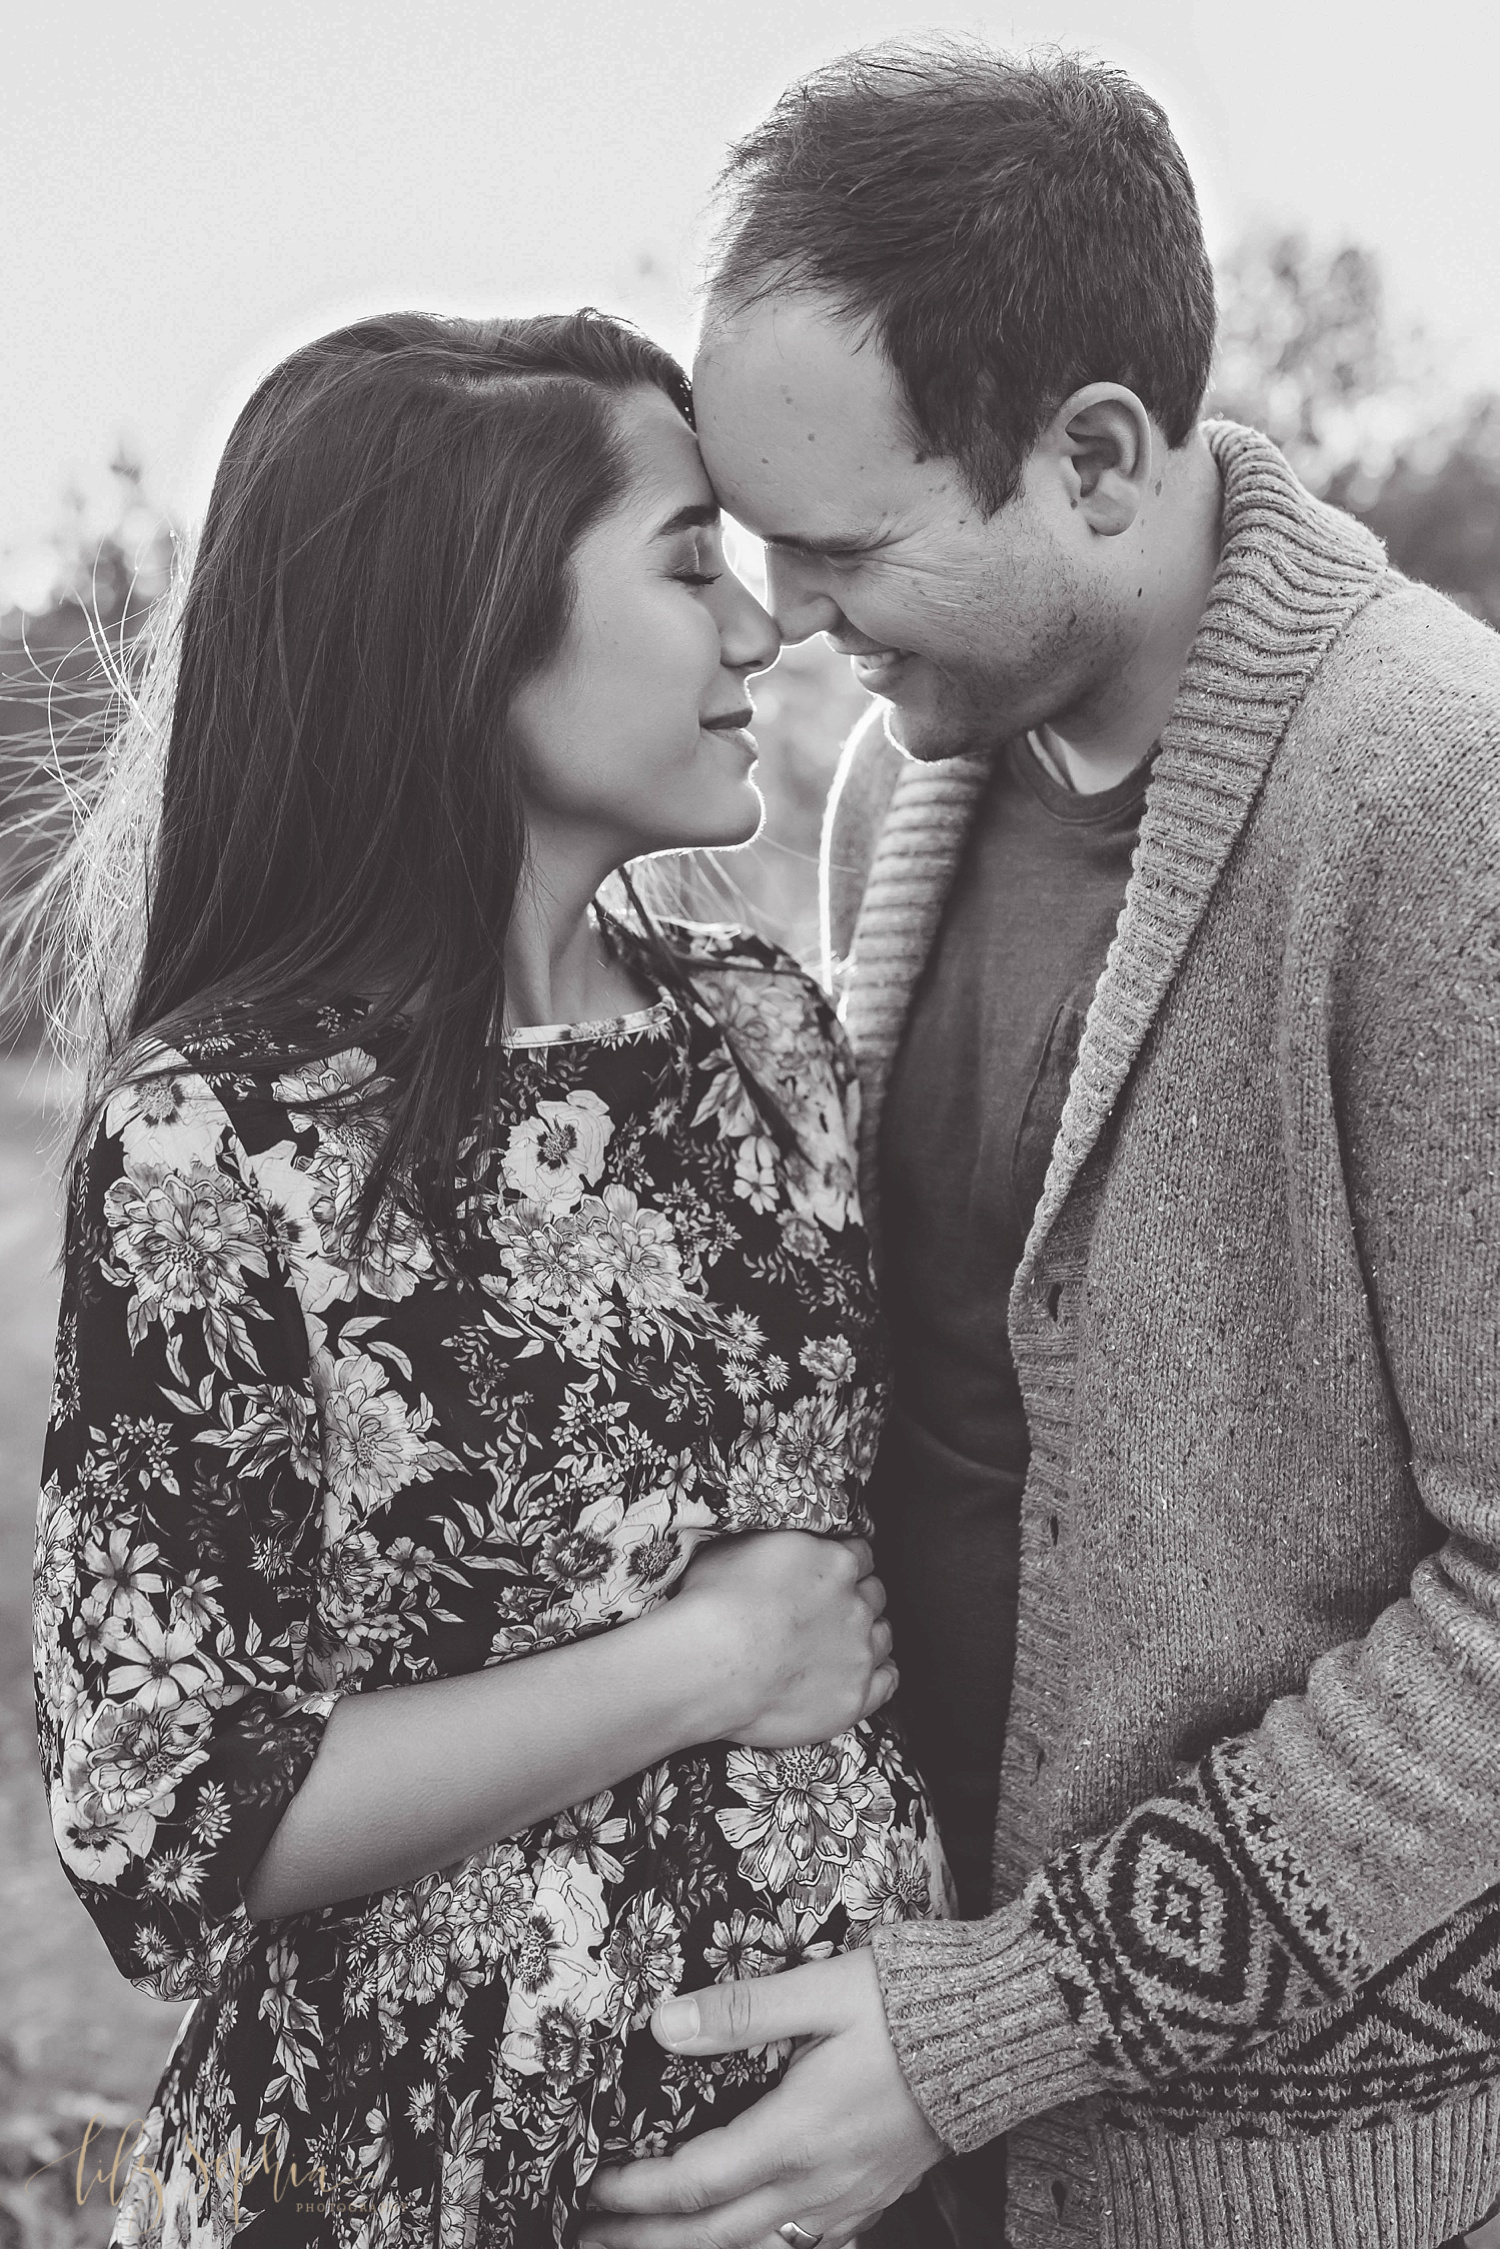  Black and white image of a pregnant woman and her husband touching foreheads.&nbsp; 